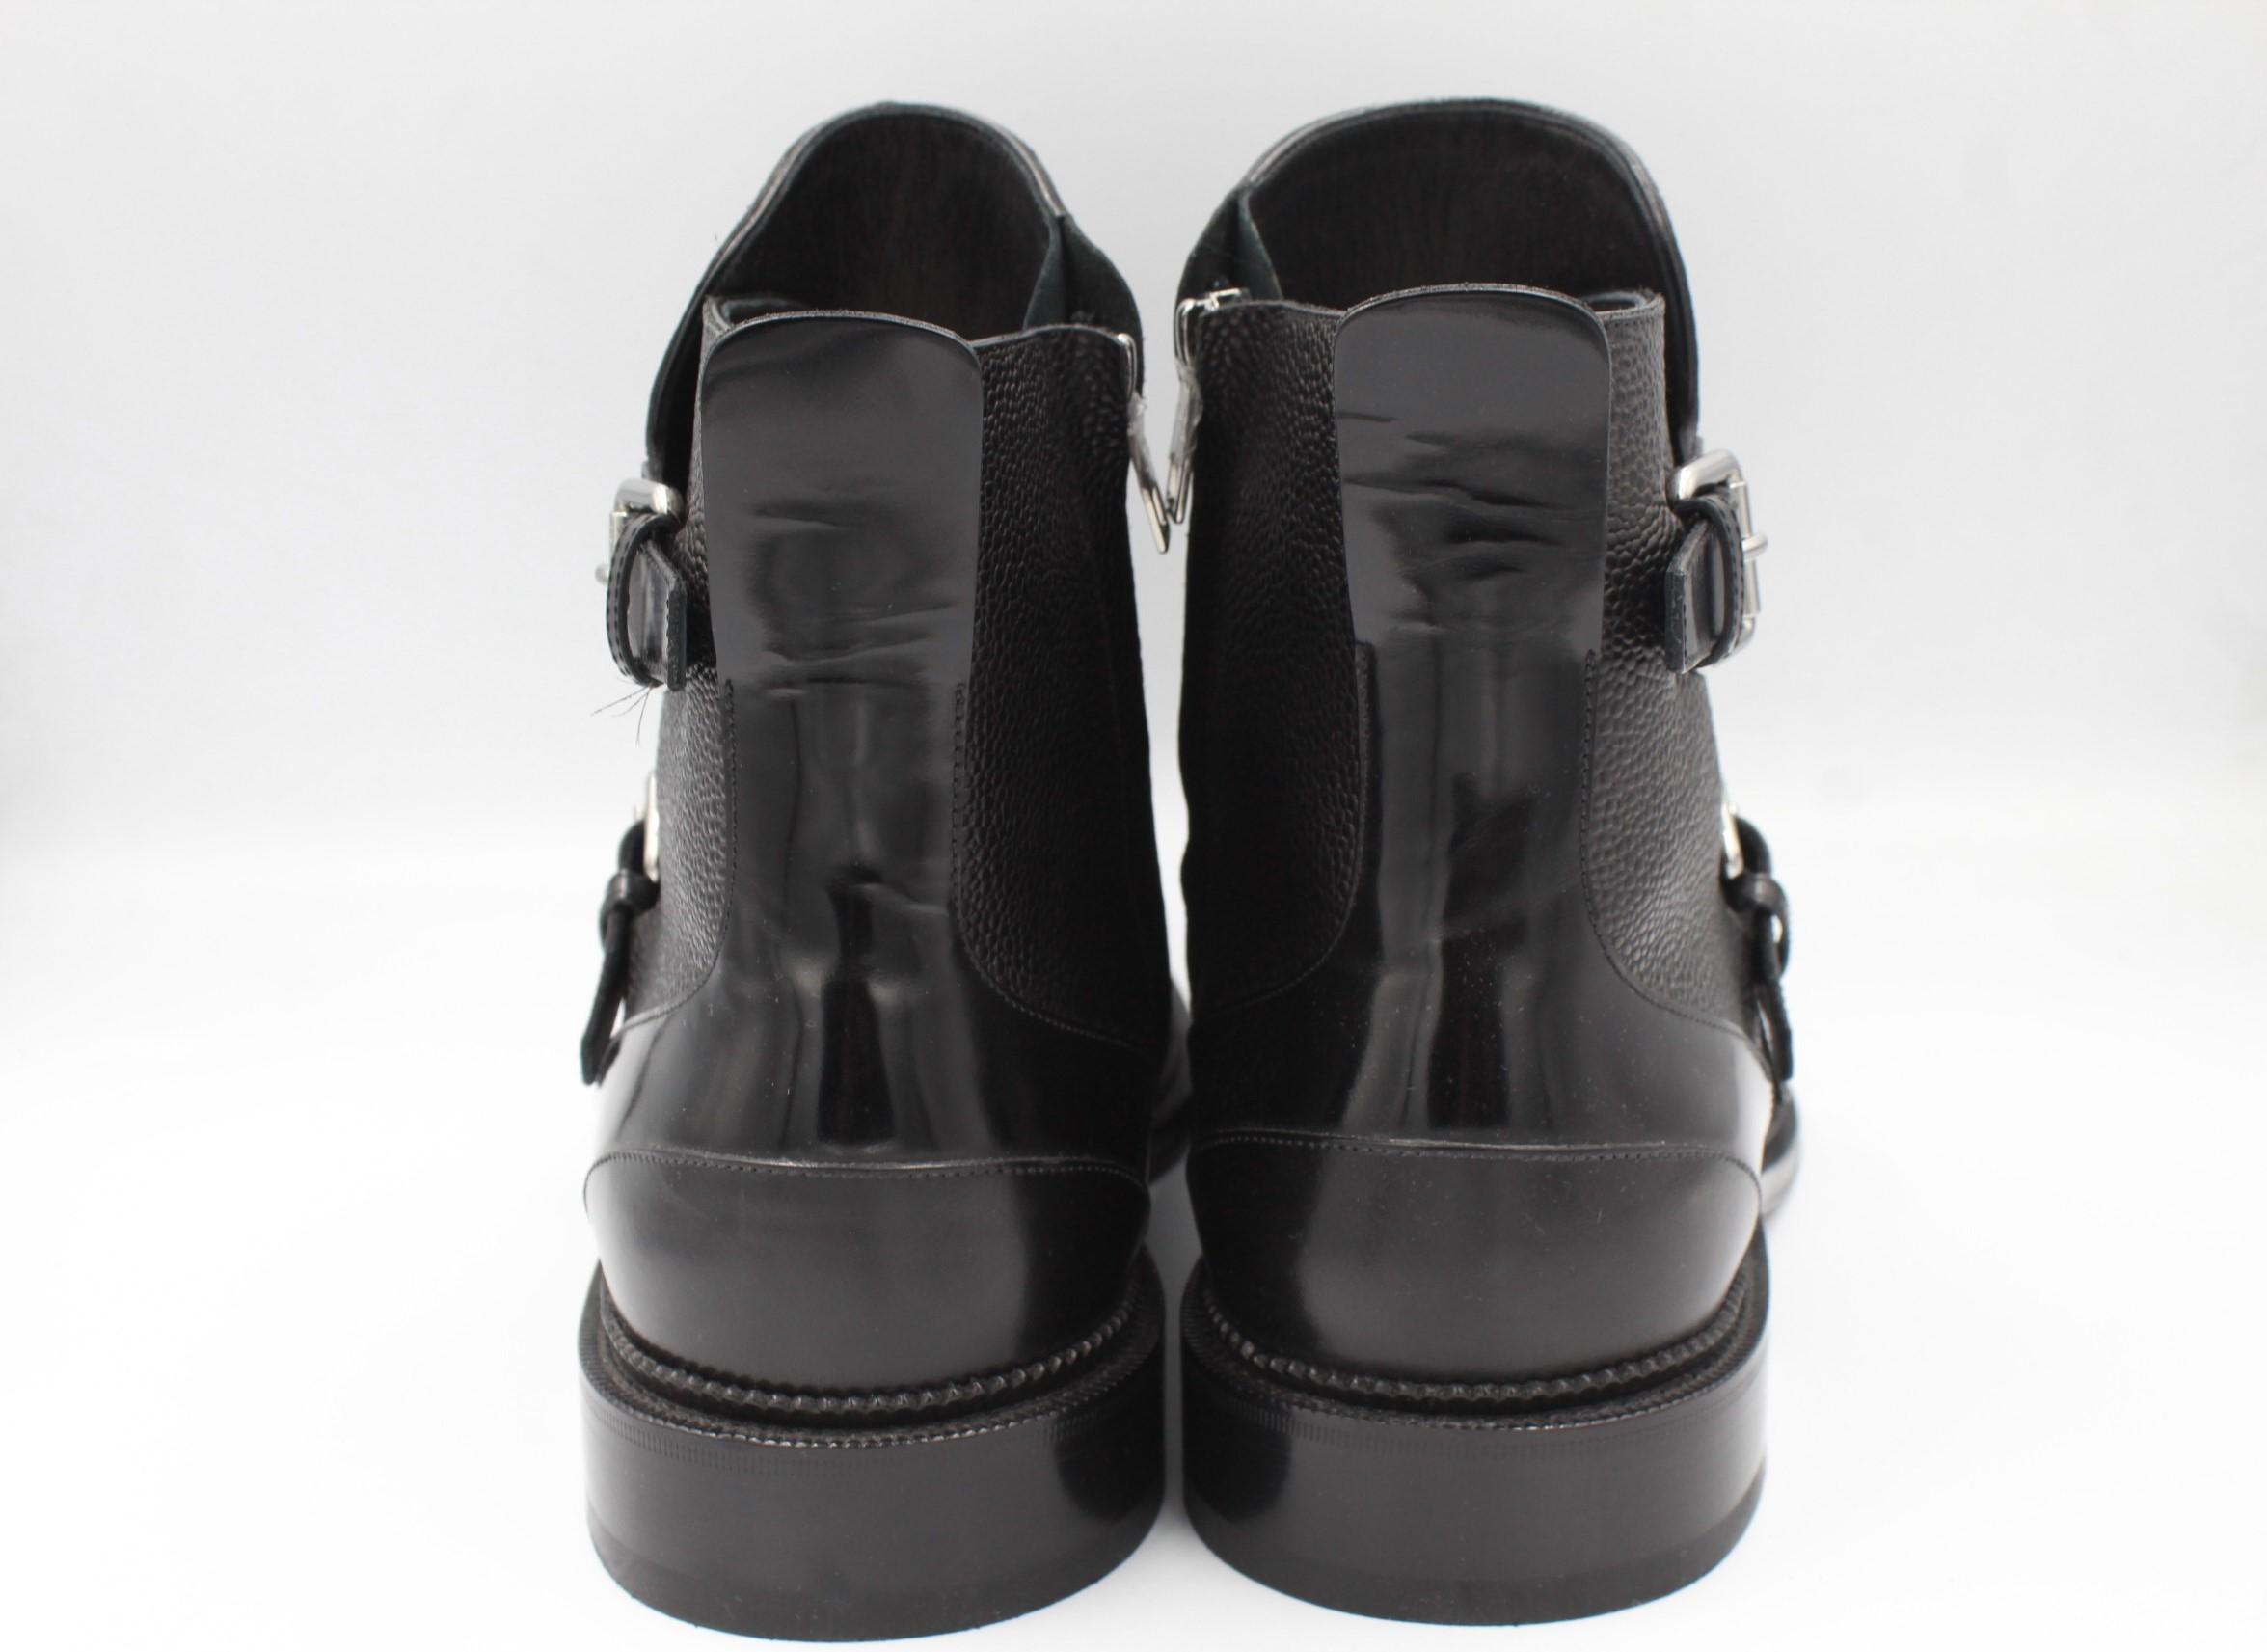 Louis Vuitton men's boots in black leather - size 11.
Really good condition, worn only a few times.
Size 11 ( UK ), 46.5 ( FR )